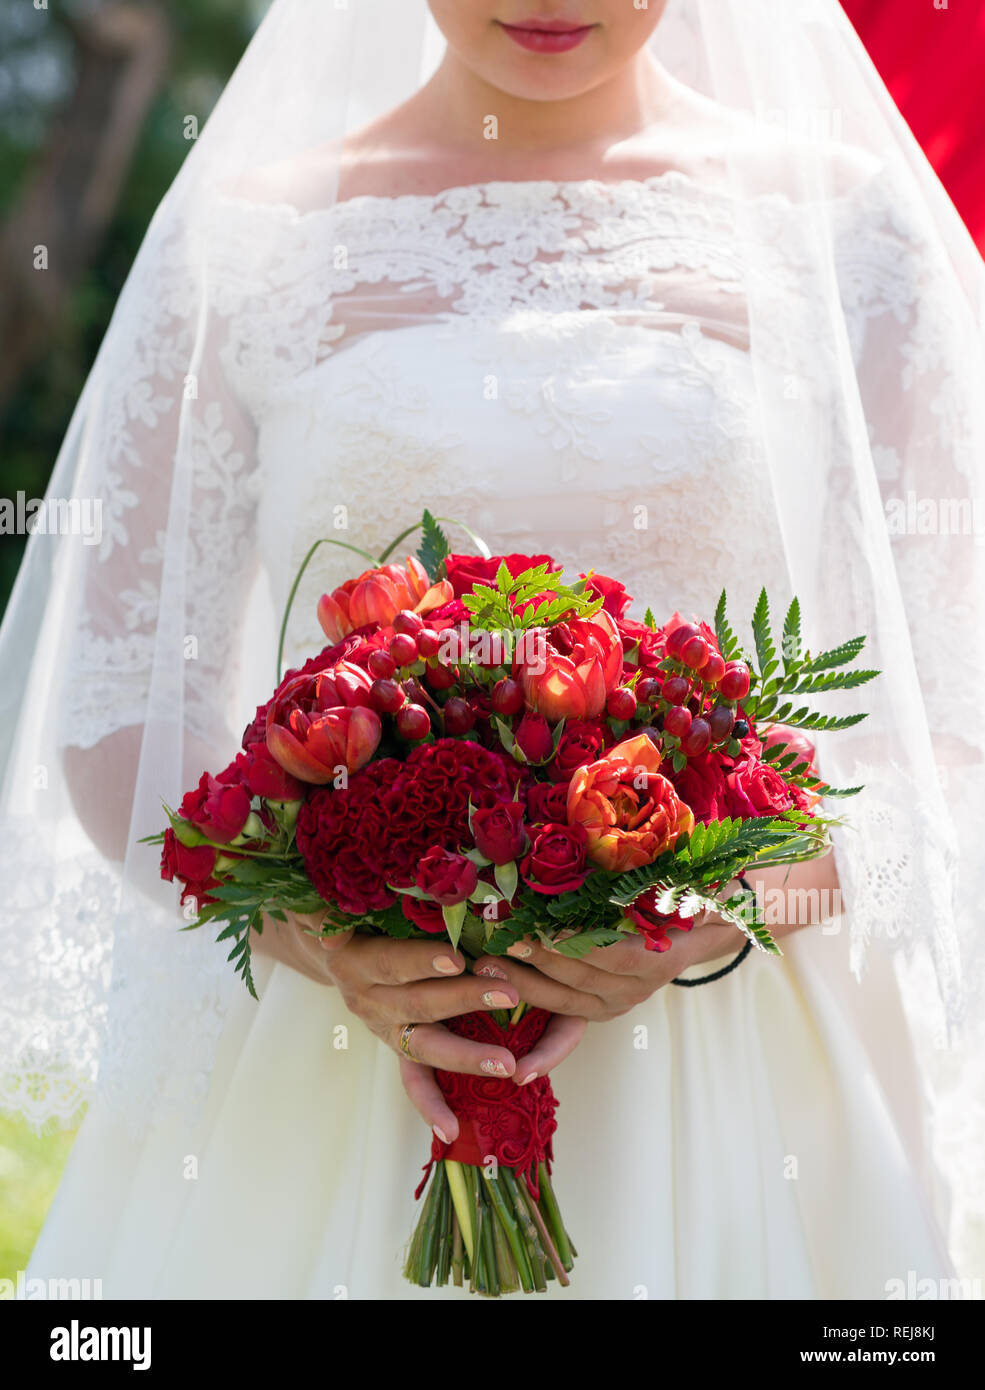 bride holds a bright red wedding bouquet Stock Photo